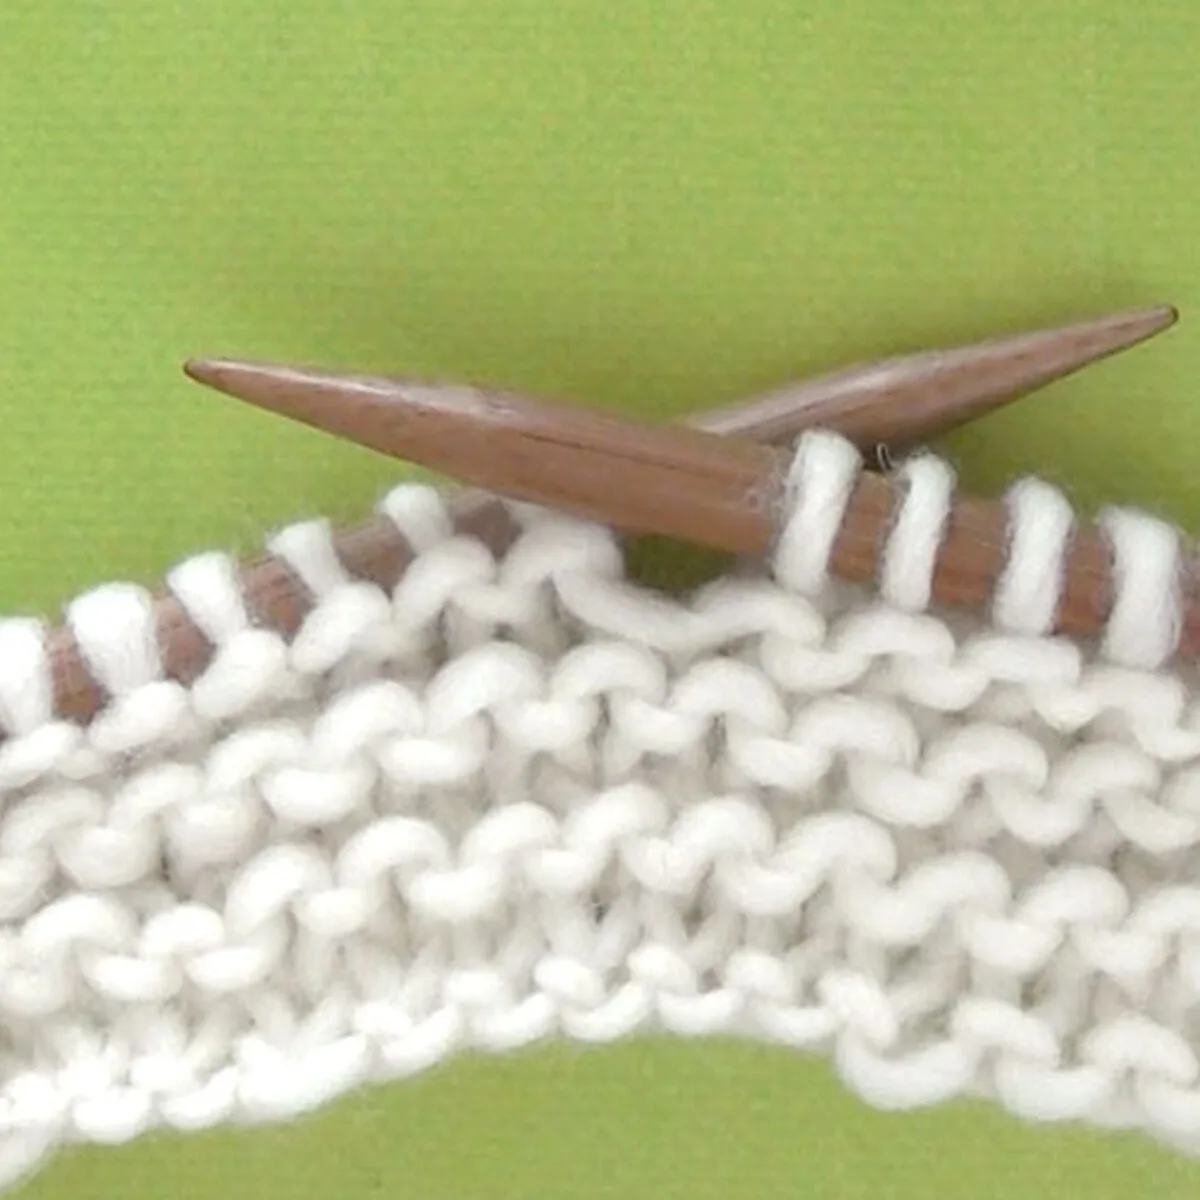 How to Knit Front & Backan Easy Knitting Stitch! : 5 Steps